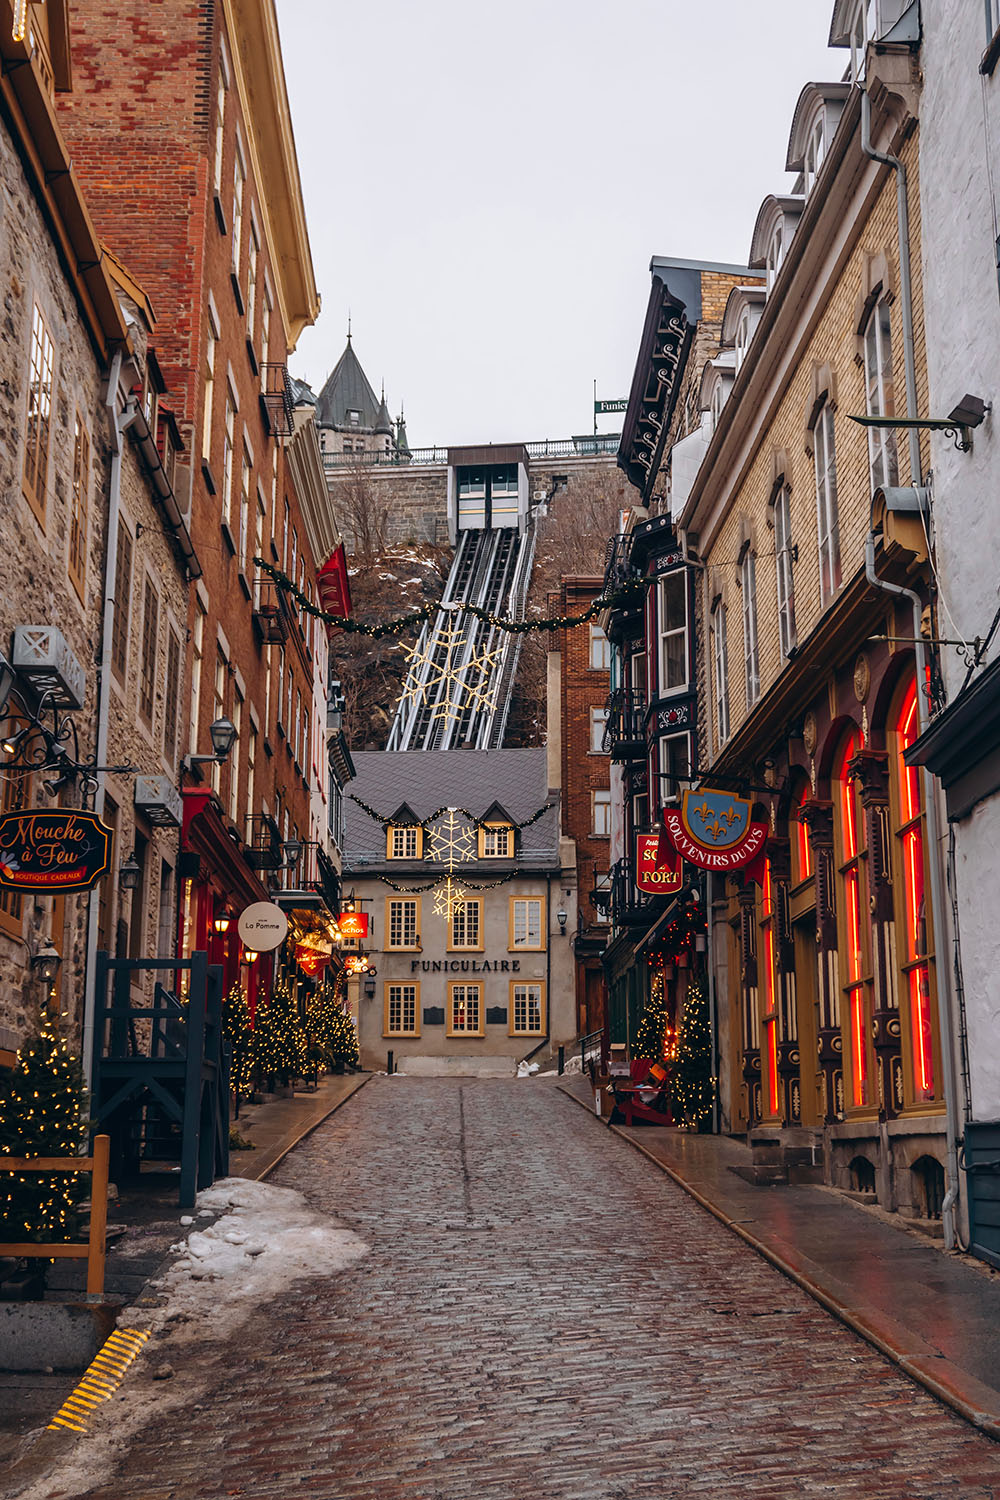 Quebec City at Christmas time is absolutely magical. In fact, it’s pretty safe to say it’s the most magical place to visit at Christmas time in all of Canada! If you’re planning a trip to Quebec City this winter you won’t want to miss this guide to the best things to do in Quebec City at Christmas time. This guide features everything from the top Quebec City activities and attractions, to the must see sights, best restaurants, festive events, and everything in between. Pictured here: Explore Old Quebec